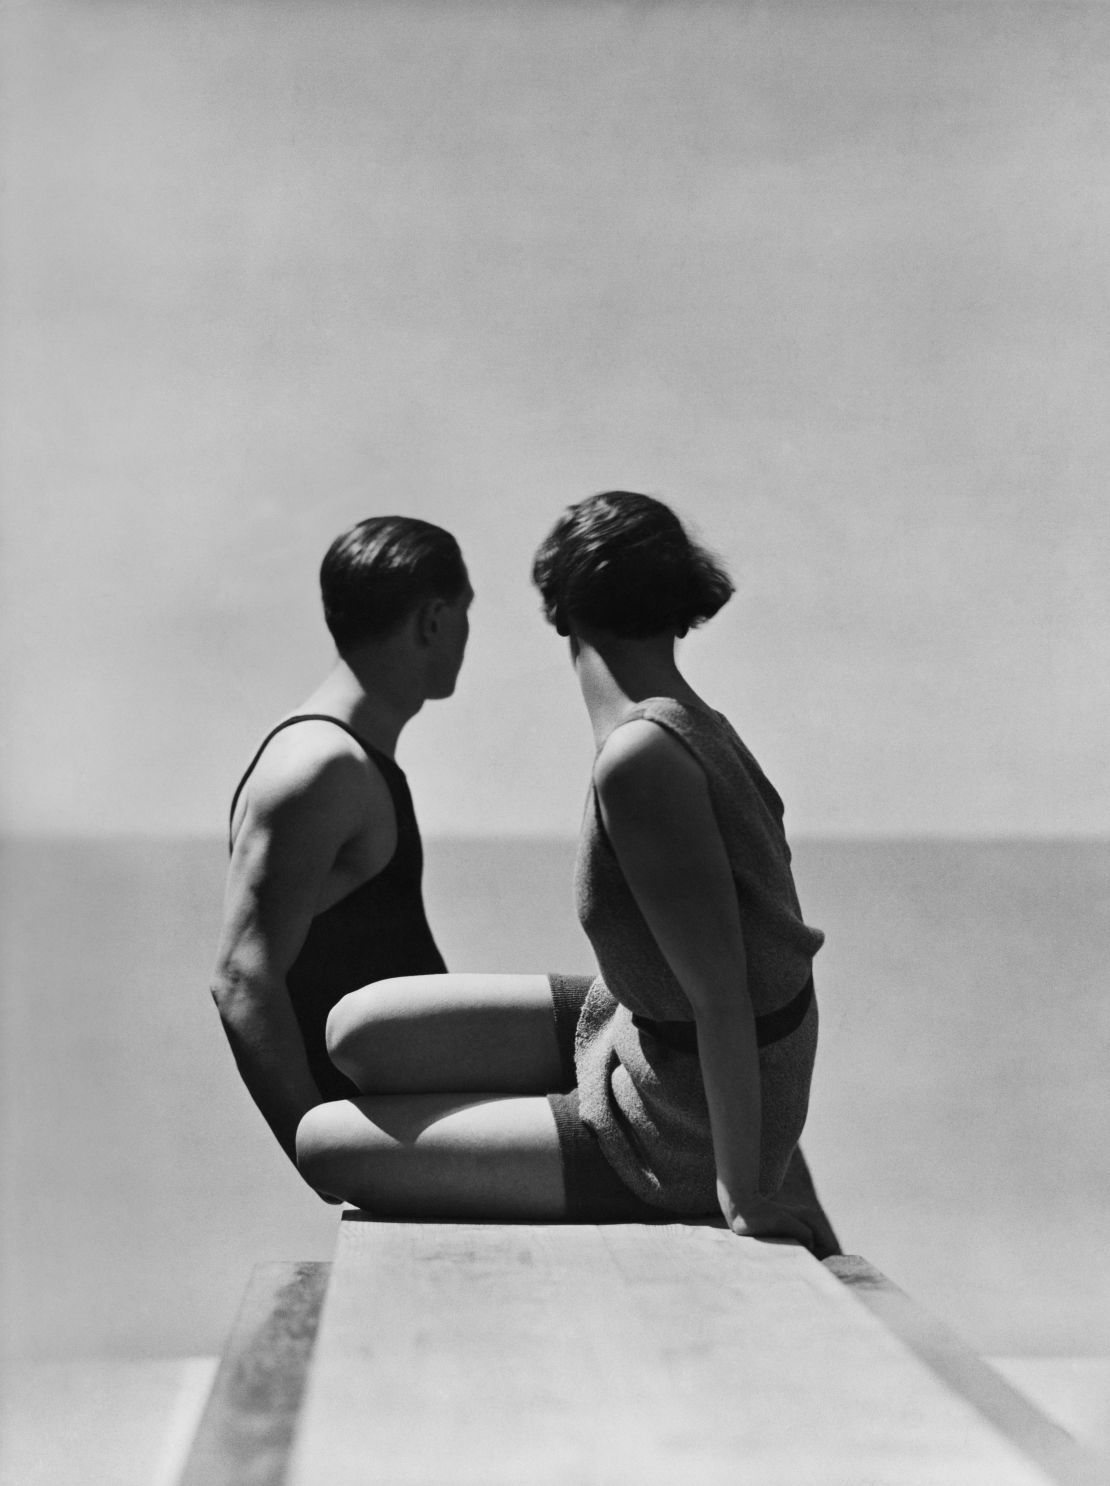 Hoyningen-Huene's famous shot "Divers" from 1930 was actually taken on a roof in Paris rather than on a beach in the Côte D'Azur.